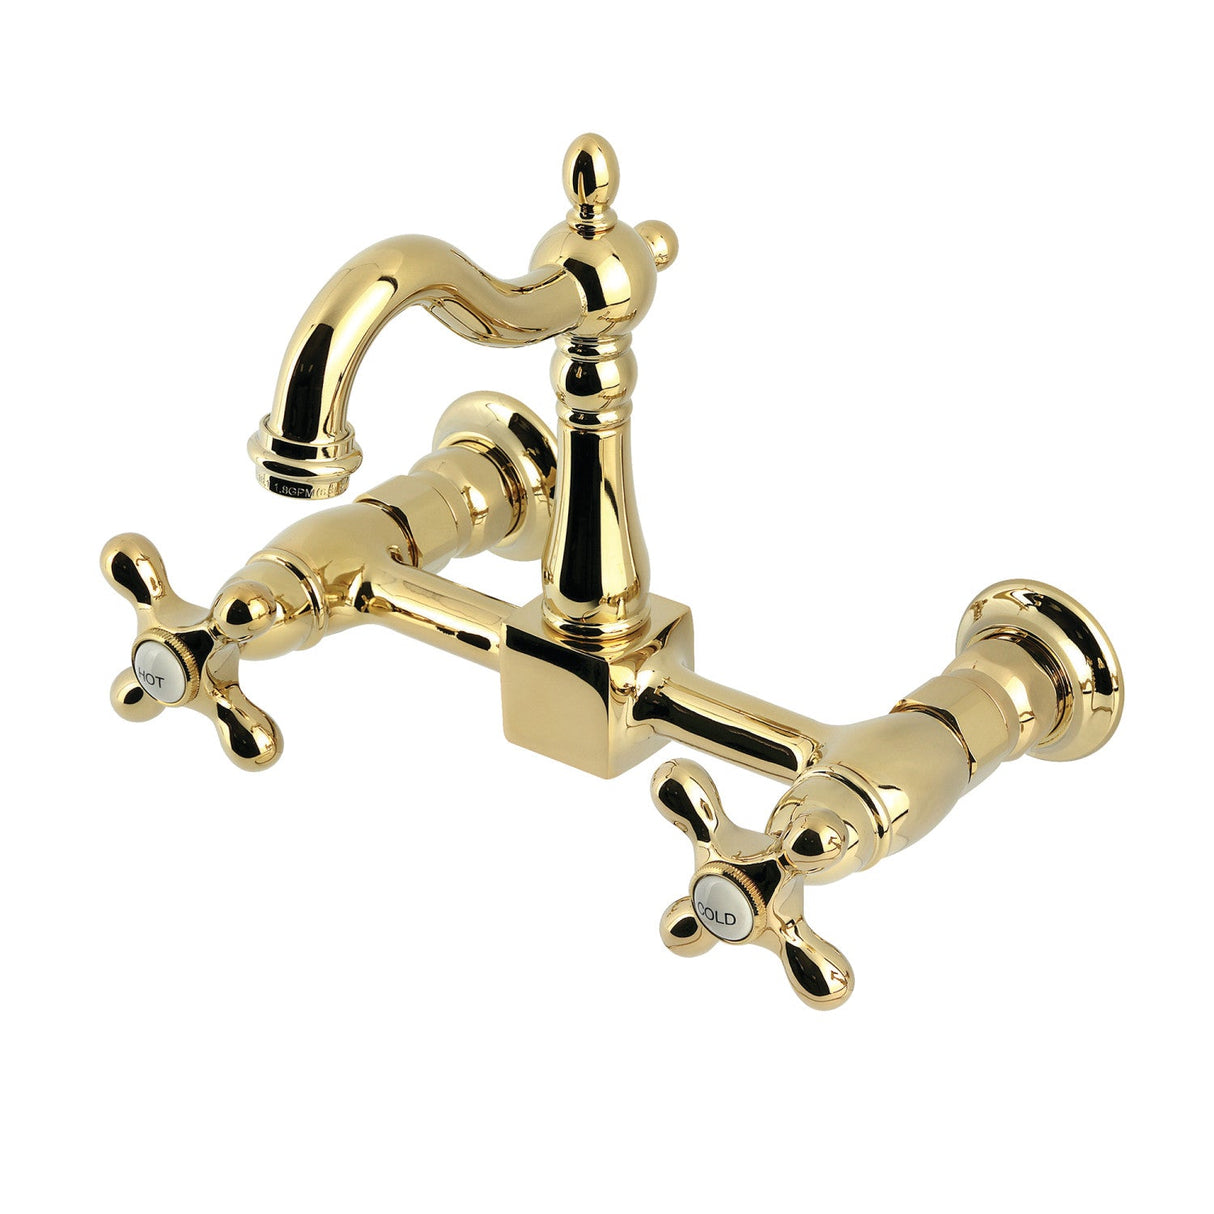 Heritage KS2442AX Two-Handle 2-Hole Wall Mount Kitchen Faucet, Polished Brass